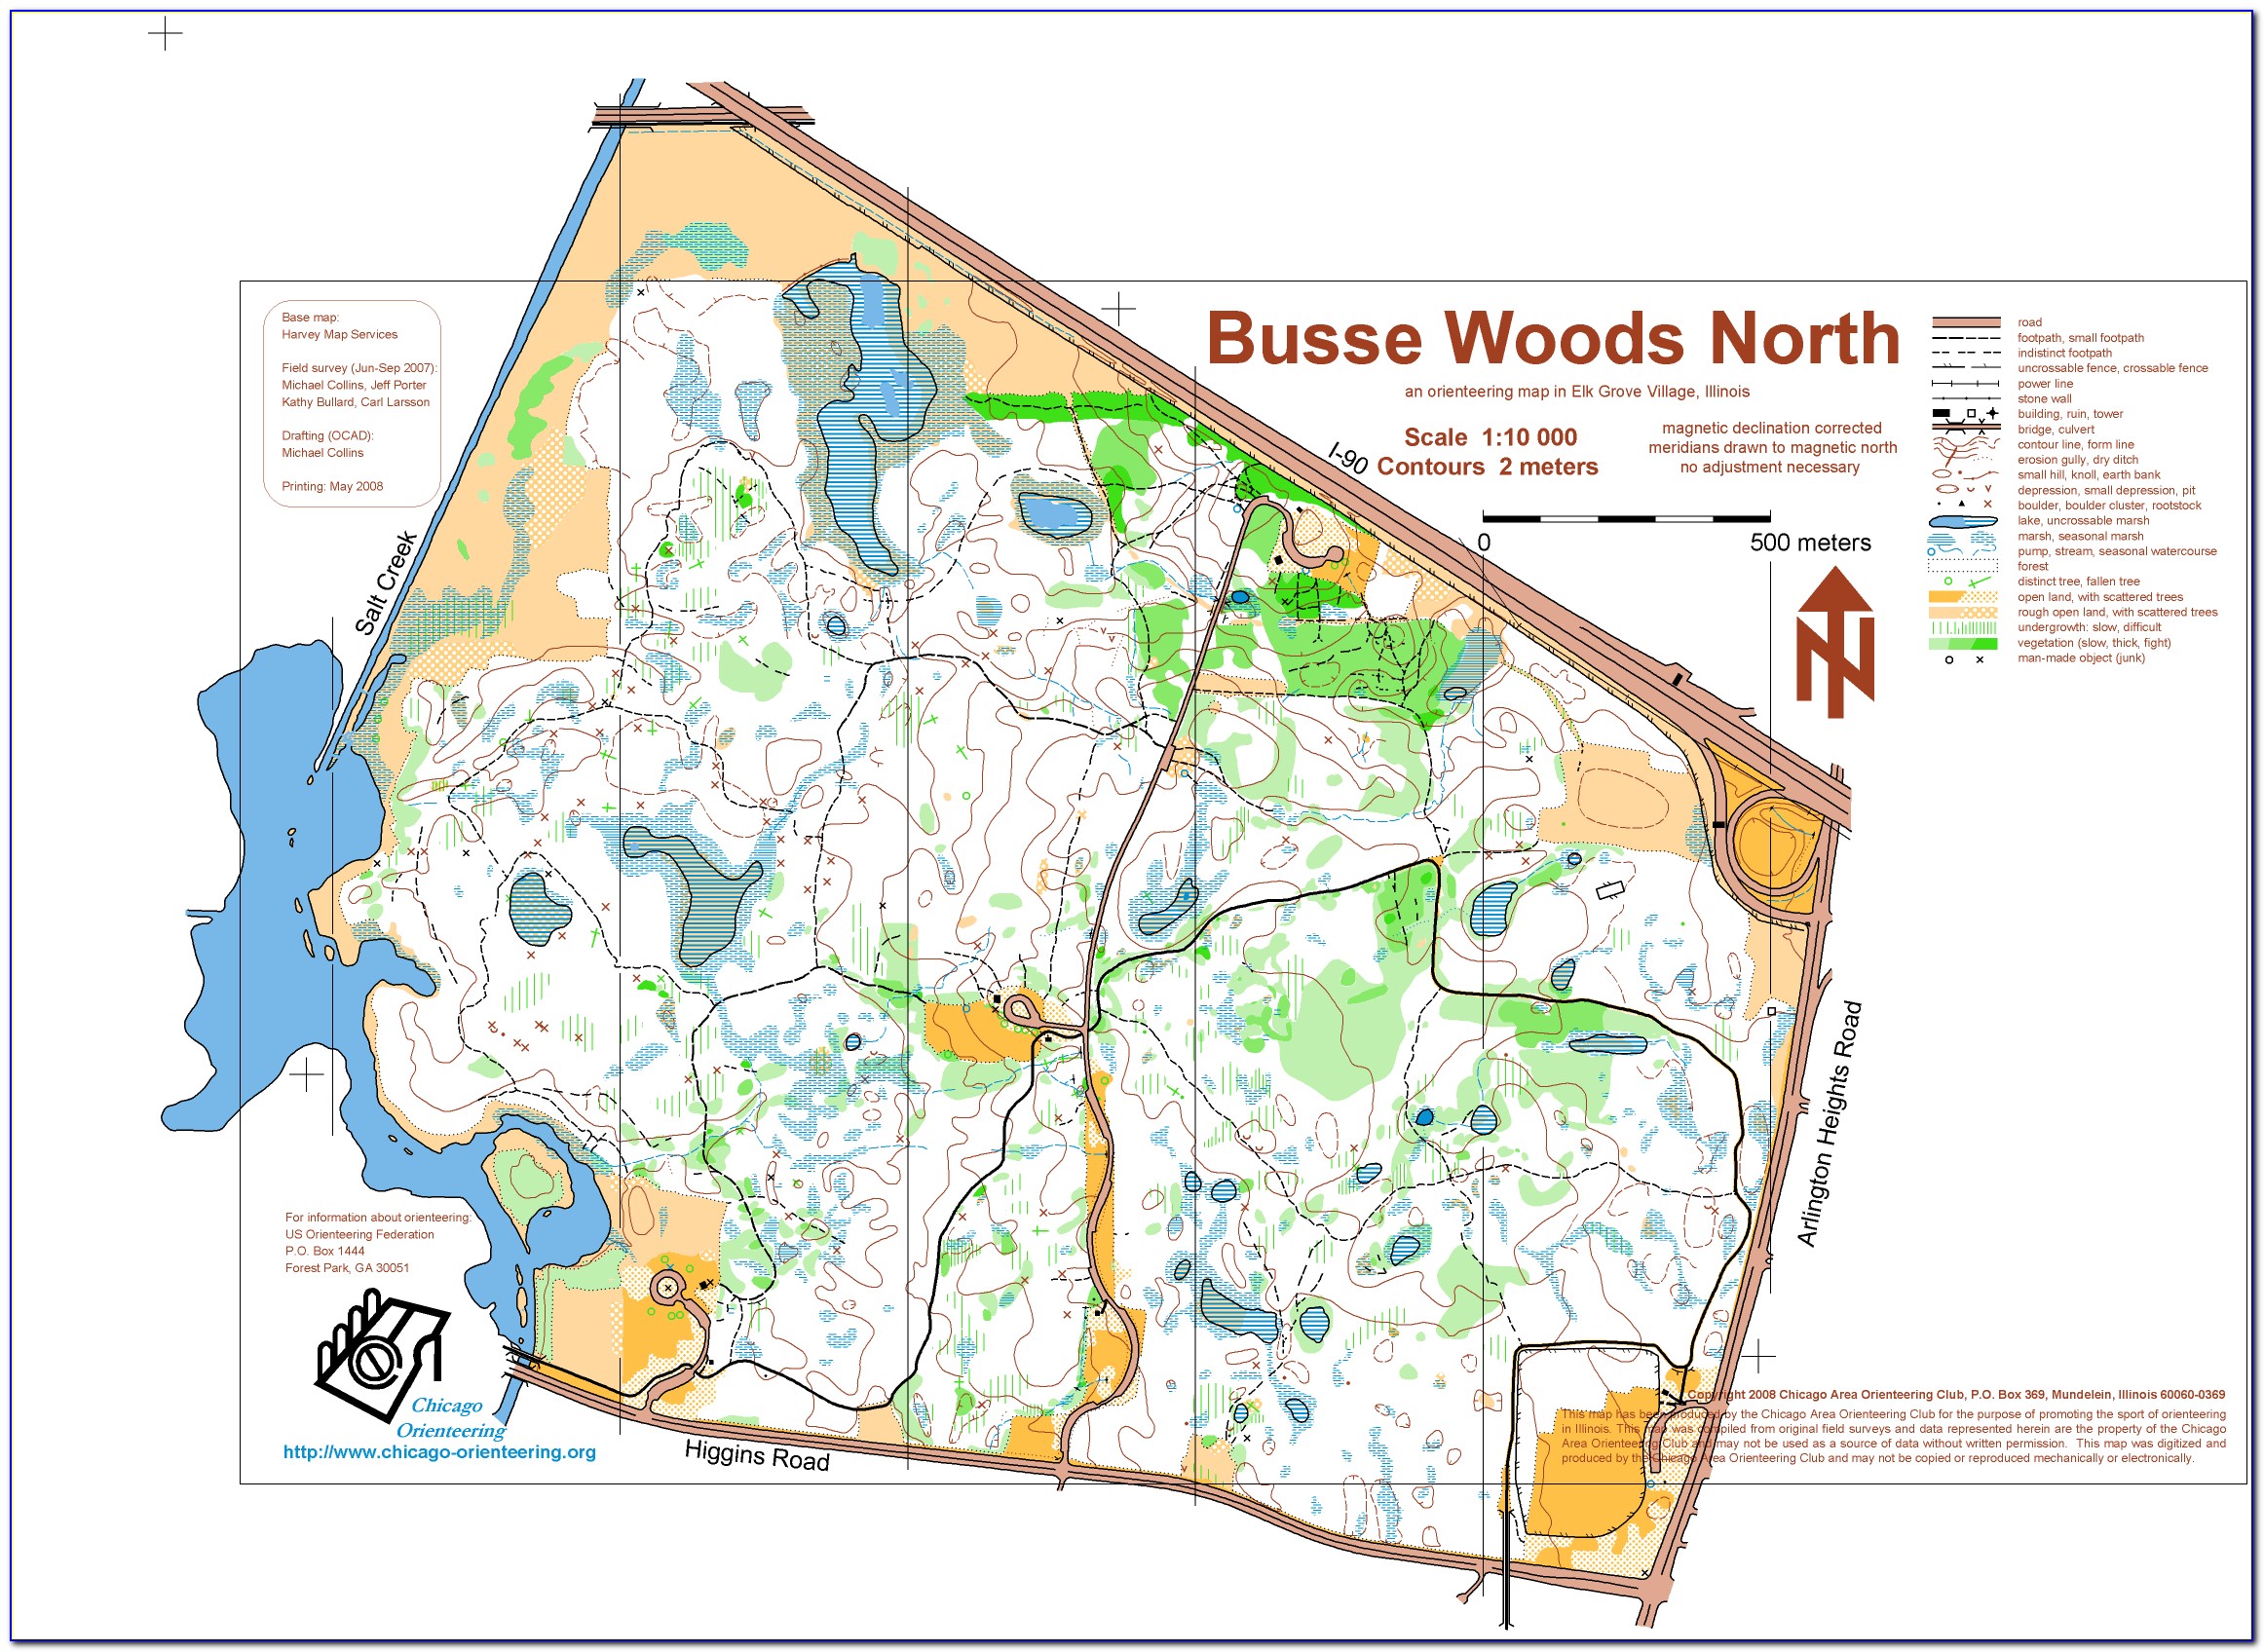 Busse Woods Directions